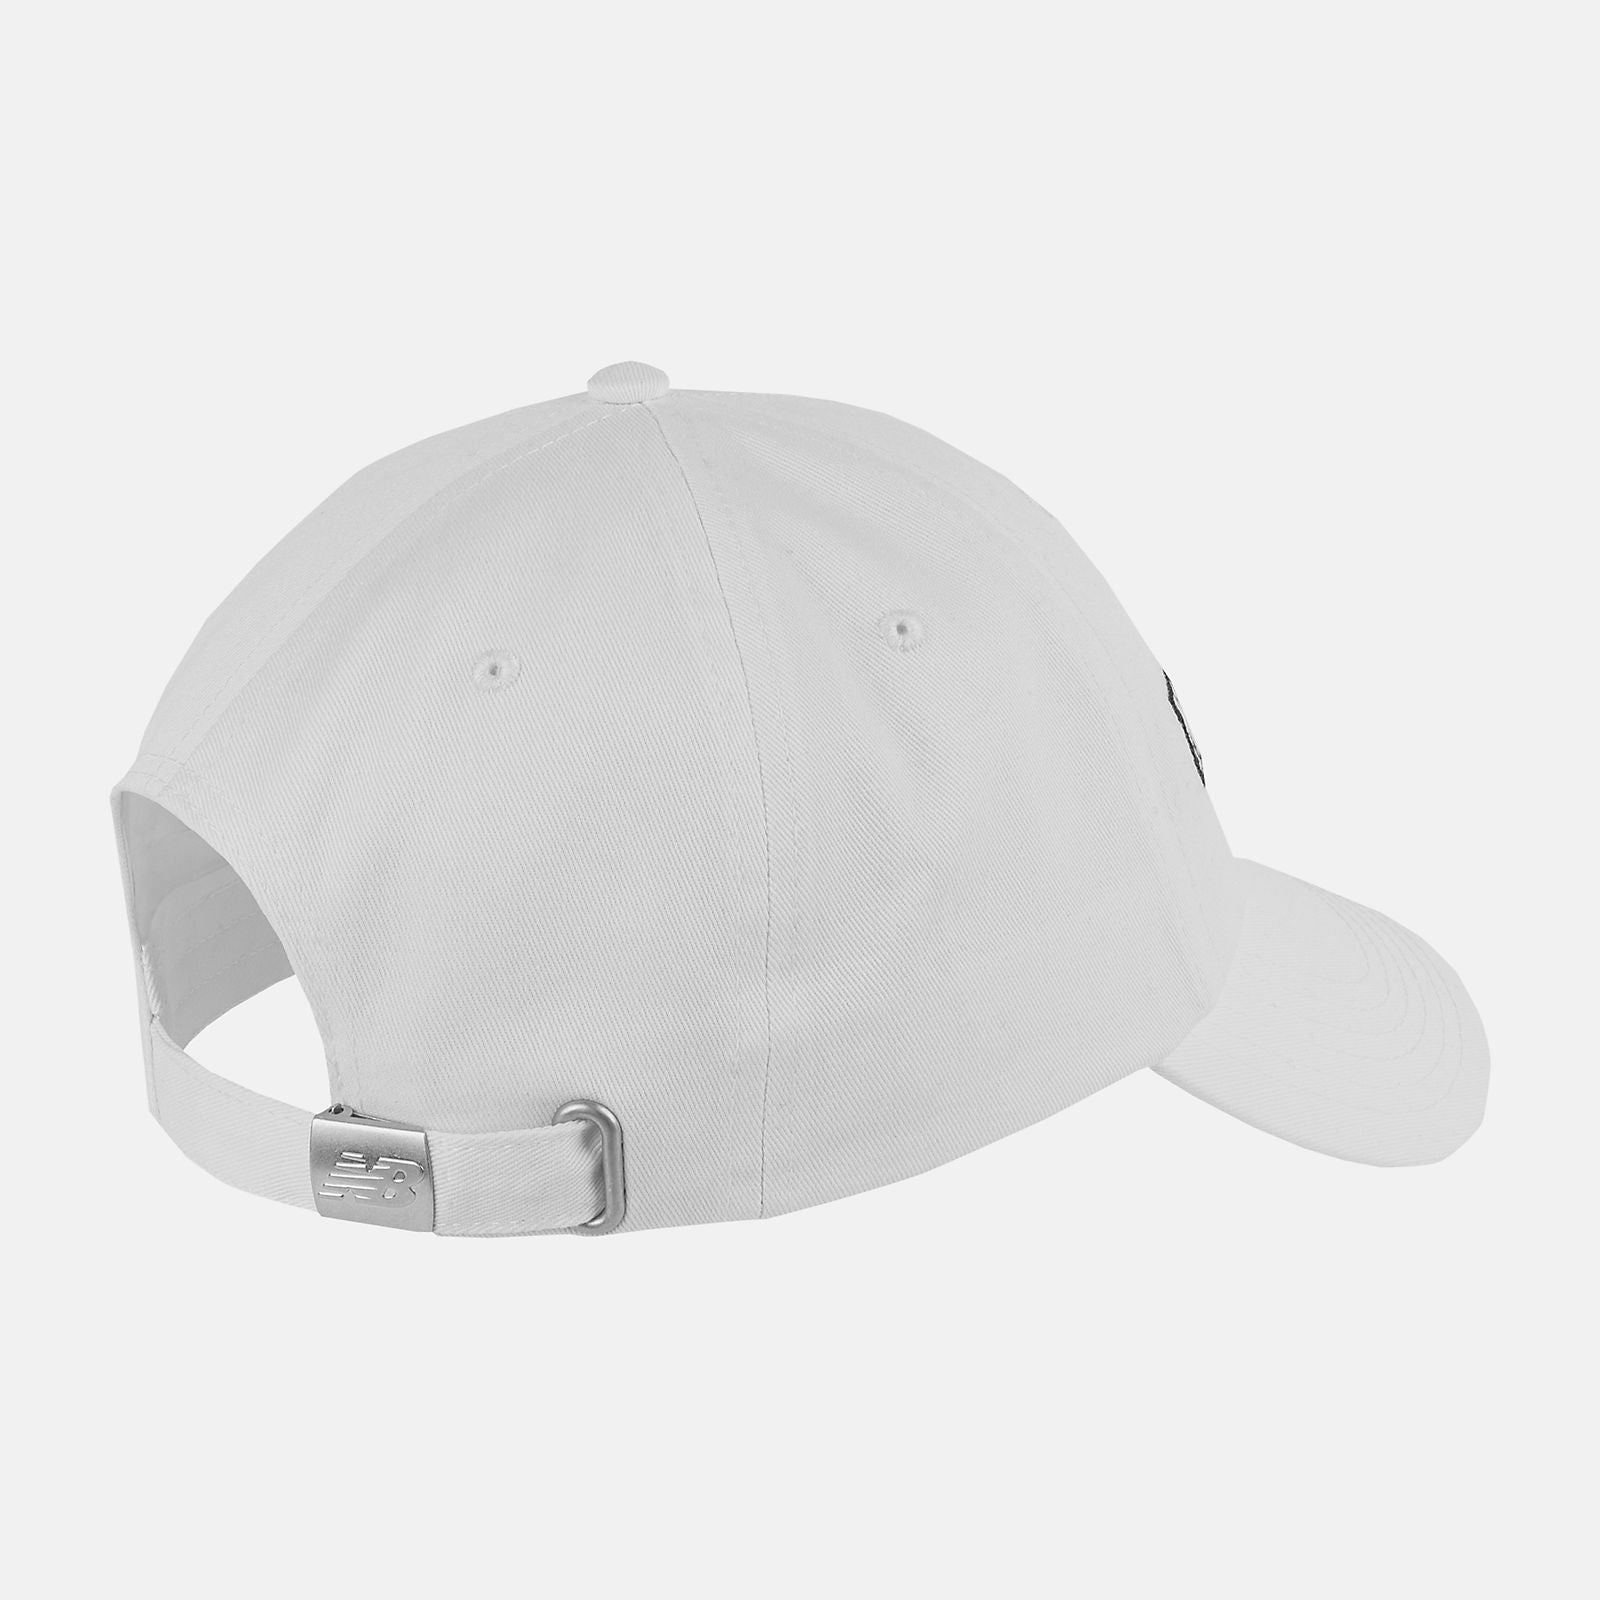 NEW BALANCE NB Logo Hat in White LAH21002 O/S WHITE FROM EIGHTYWINGOLD - OFFICIAL BRAND PARTNER